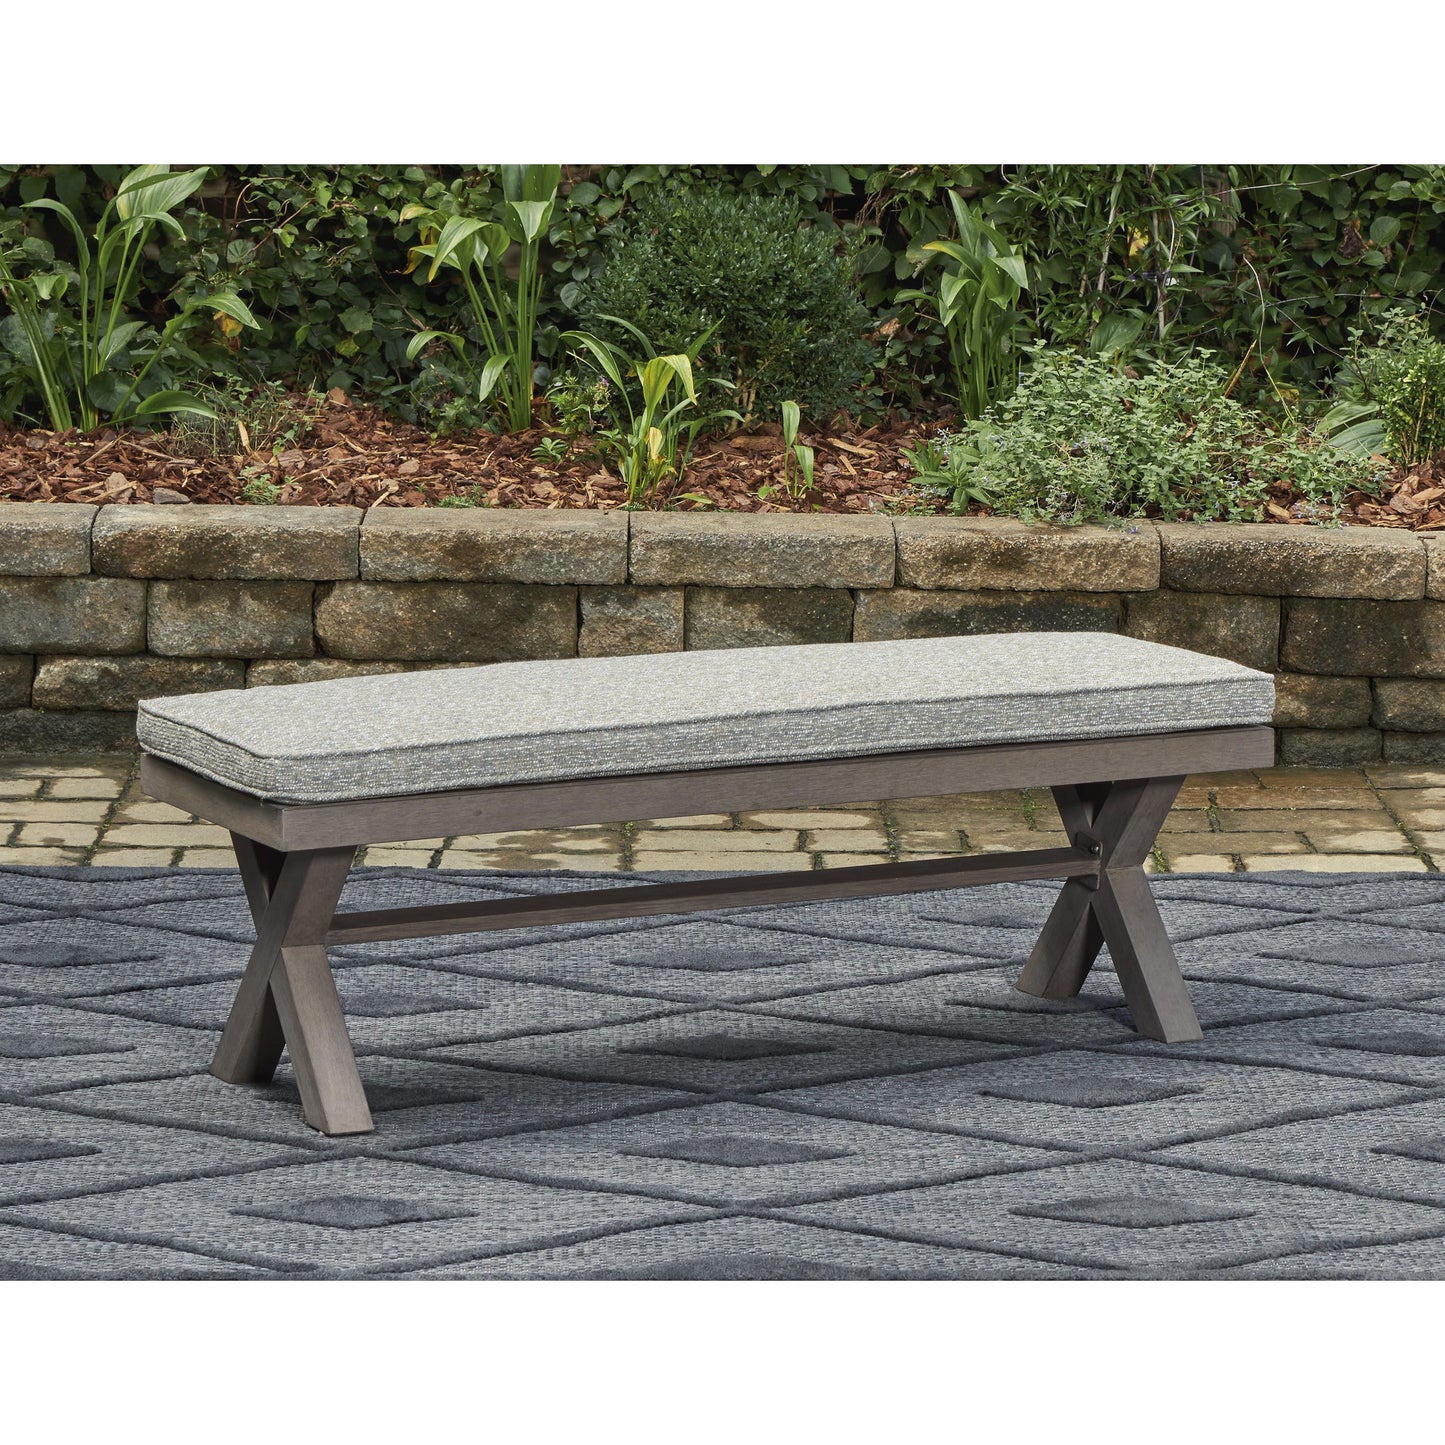 Signature Design by Ashley Outdoor Seating Benches P564-600 IMAGE 5